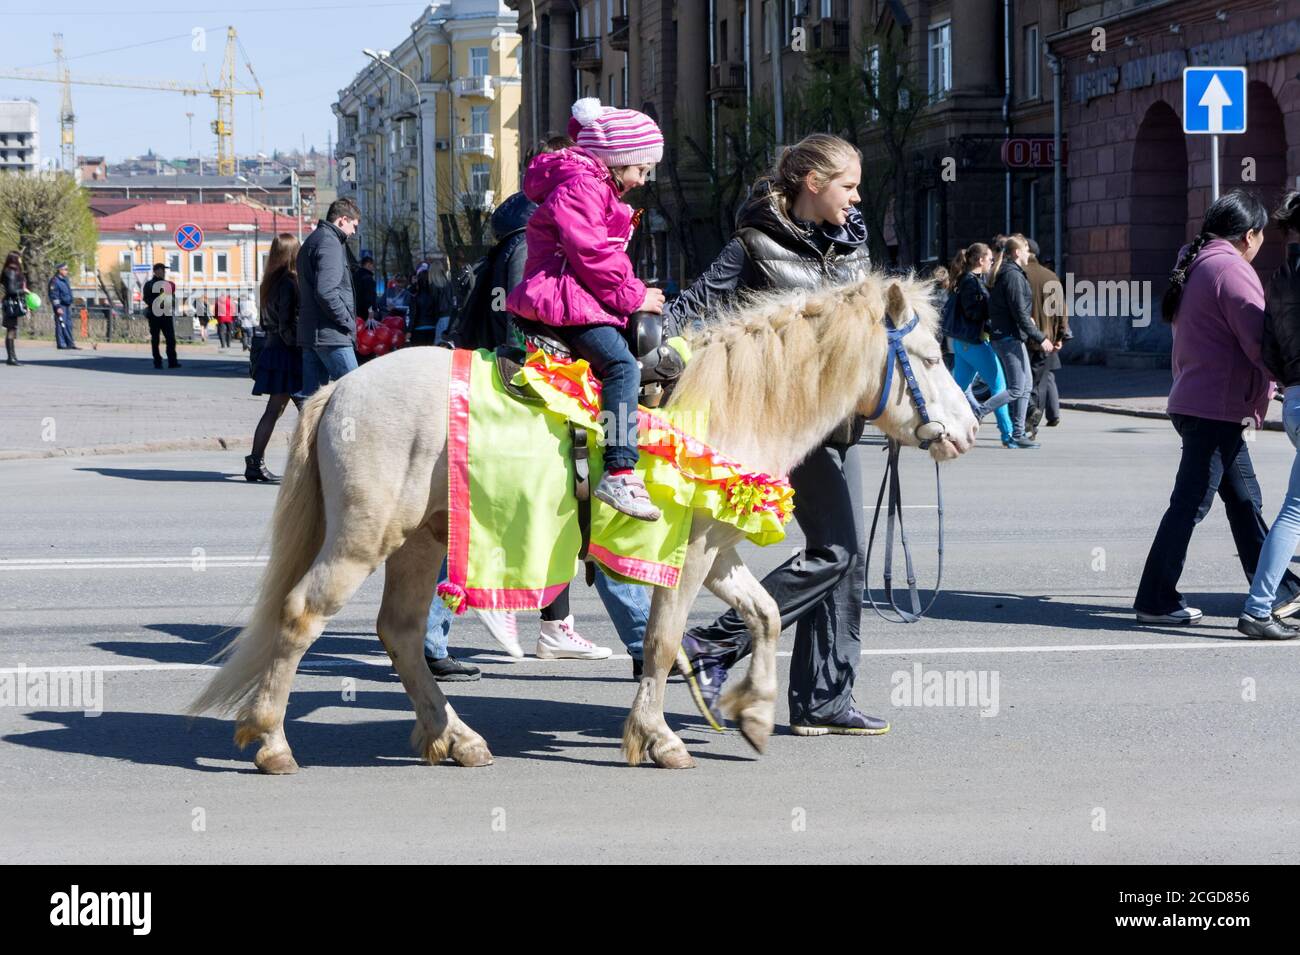 A little girl rides on a smart white pony driven by a girl along the avenue of Krasnoyarsk city during the celebration of Victory Day WWII. Stock Photo